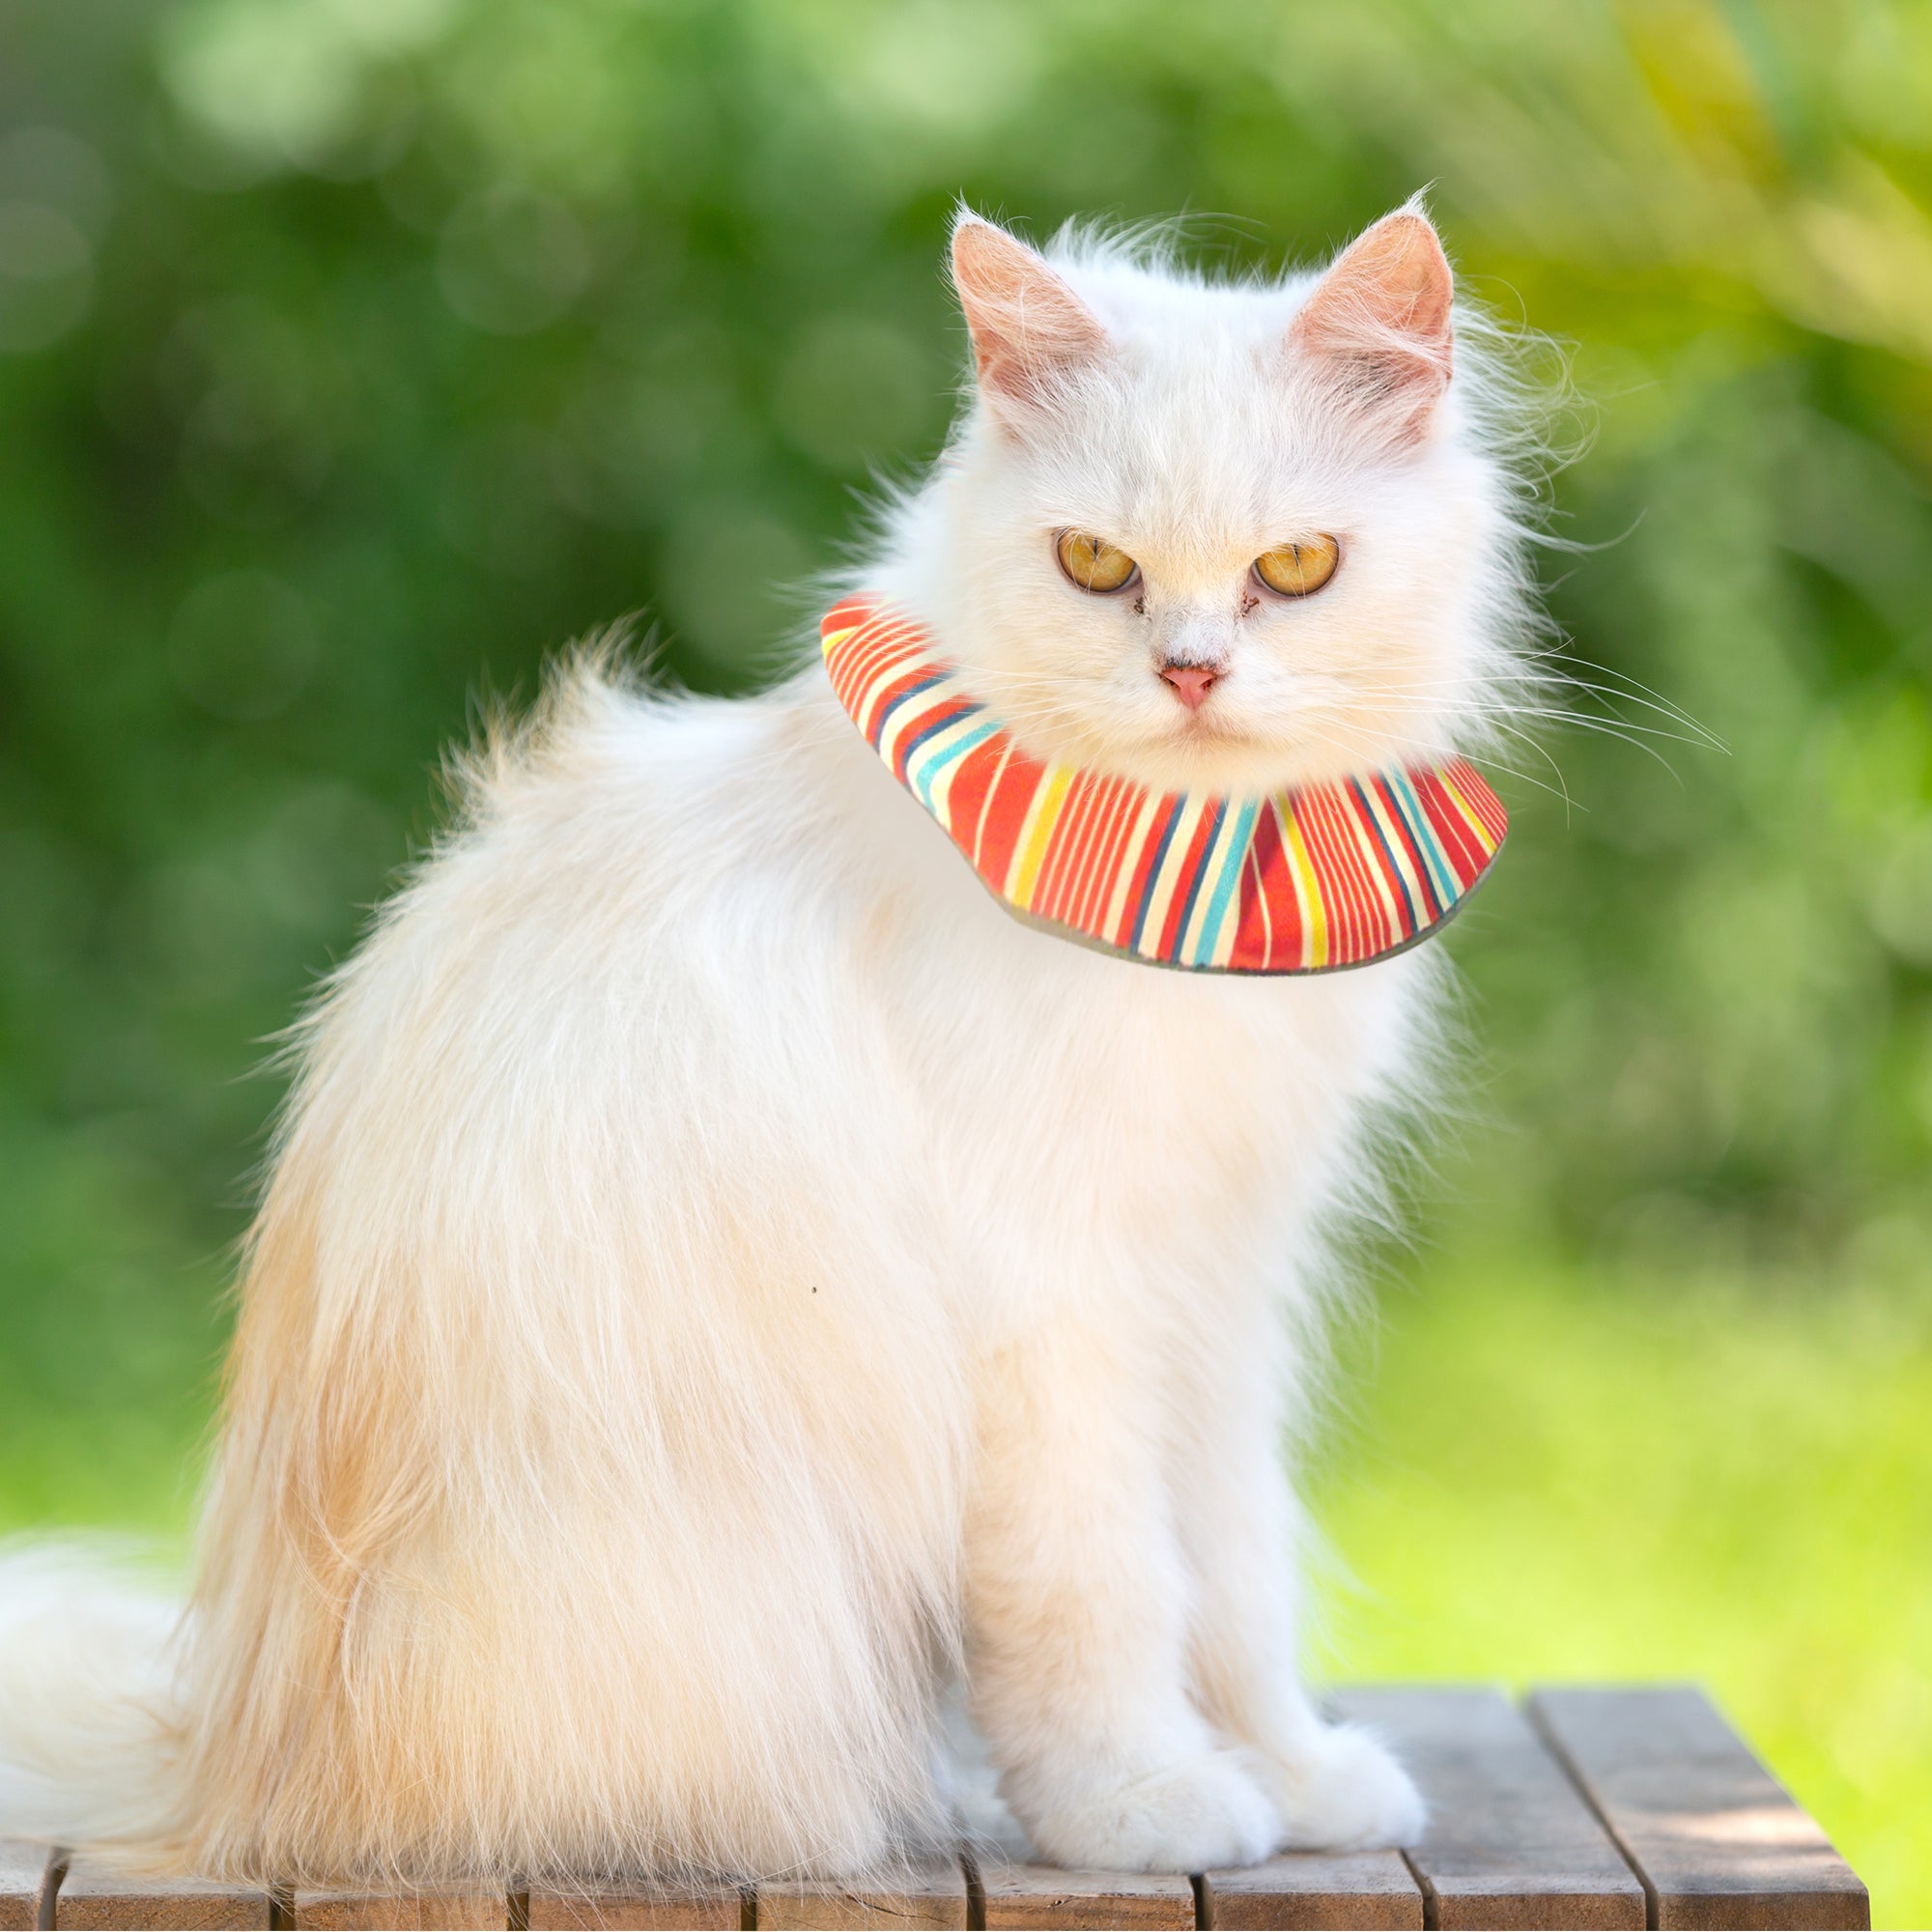 Birdsbesafe® Collar Cover - Long-haired Cat Style